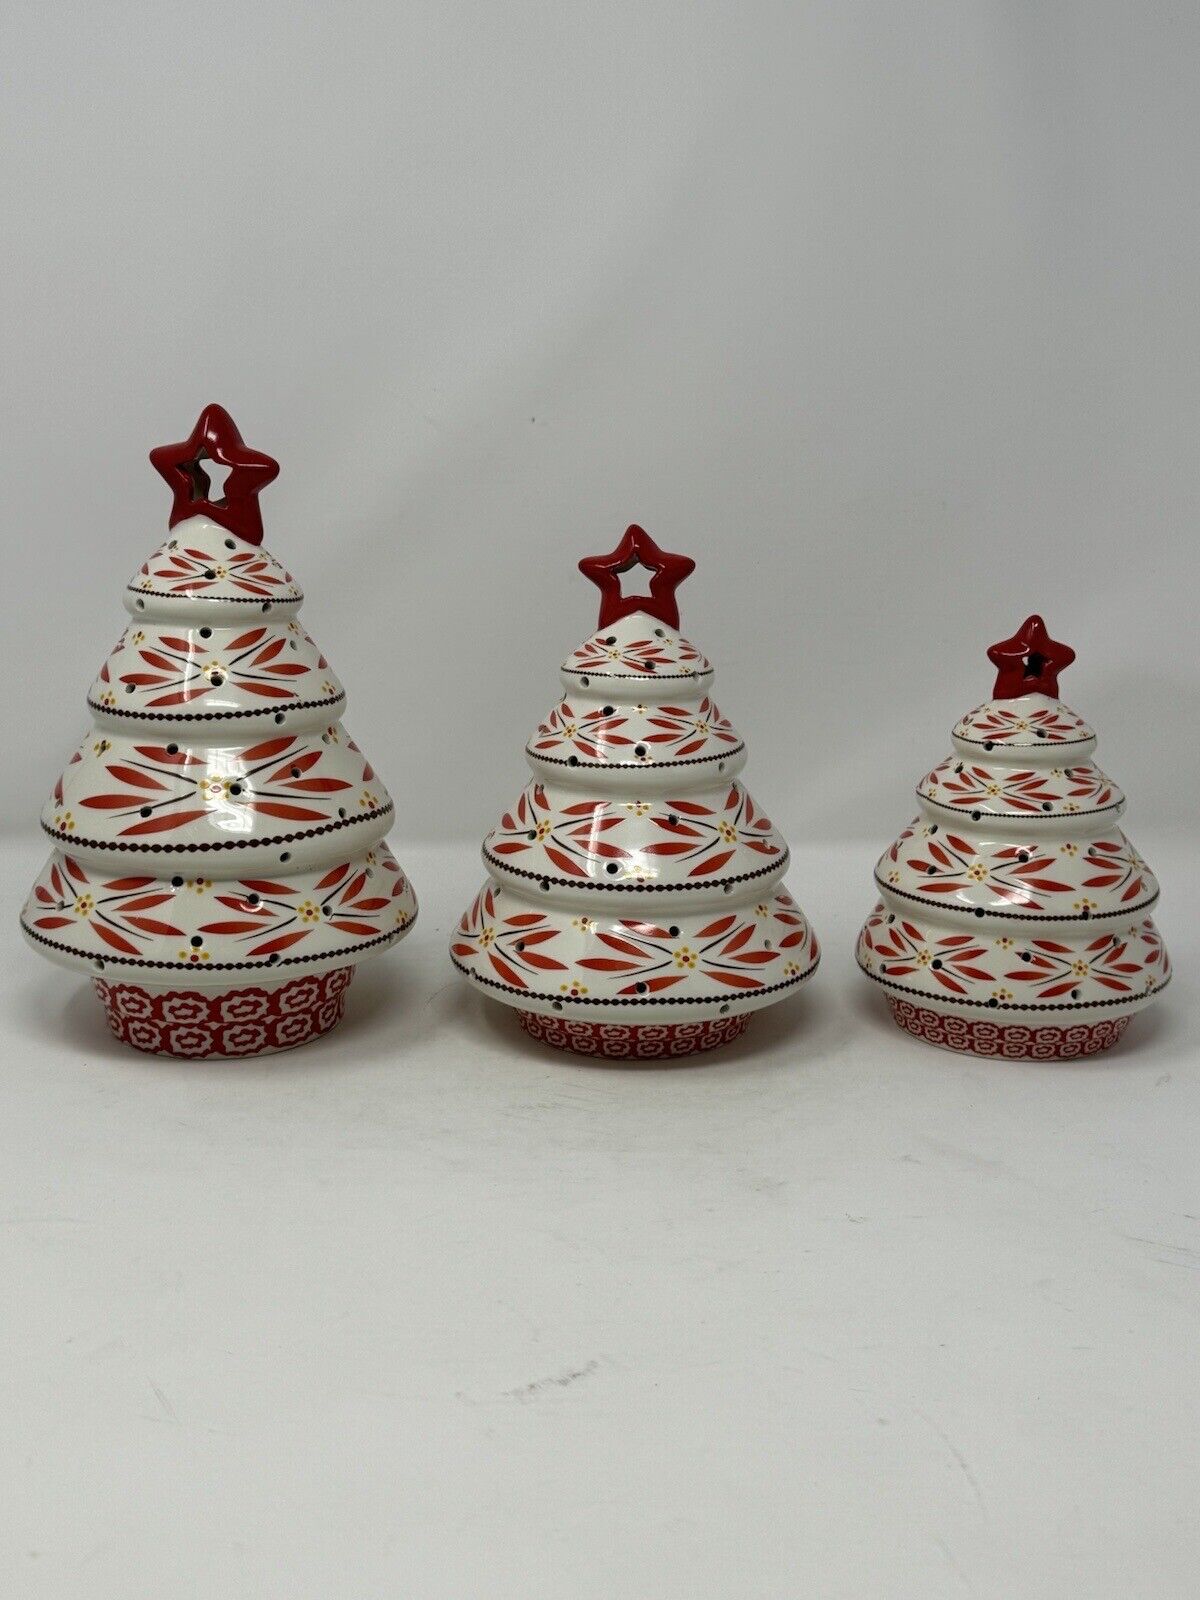 Temptations By Tara Light Up Christmas Trees Set Of 3 Ceramic Color Changing red